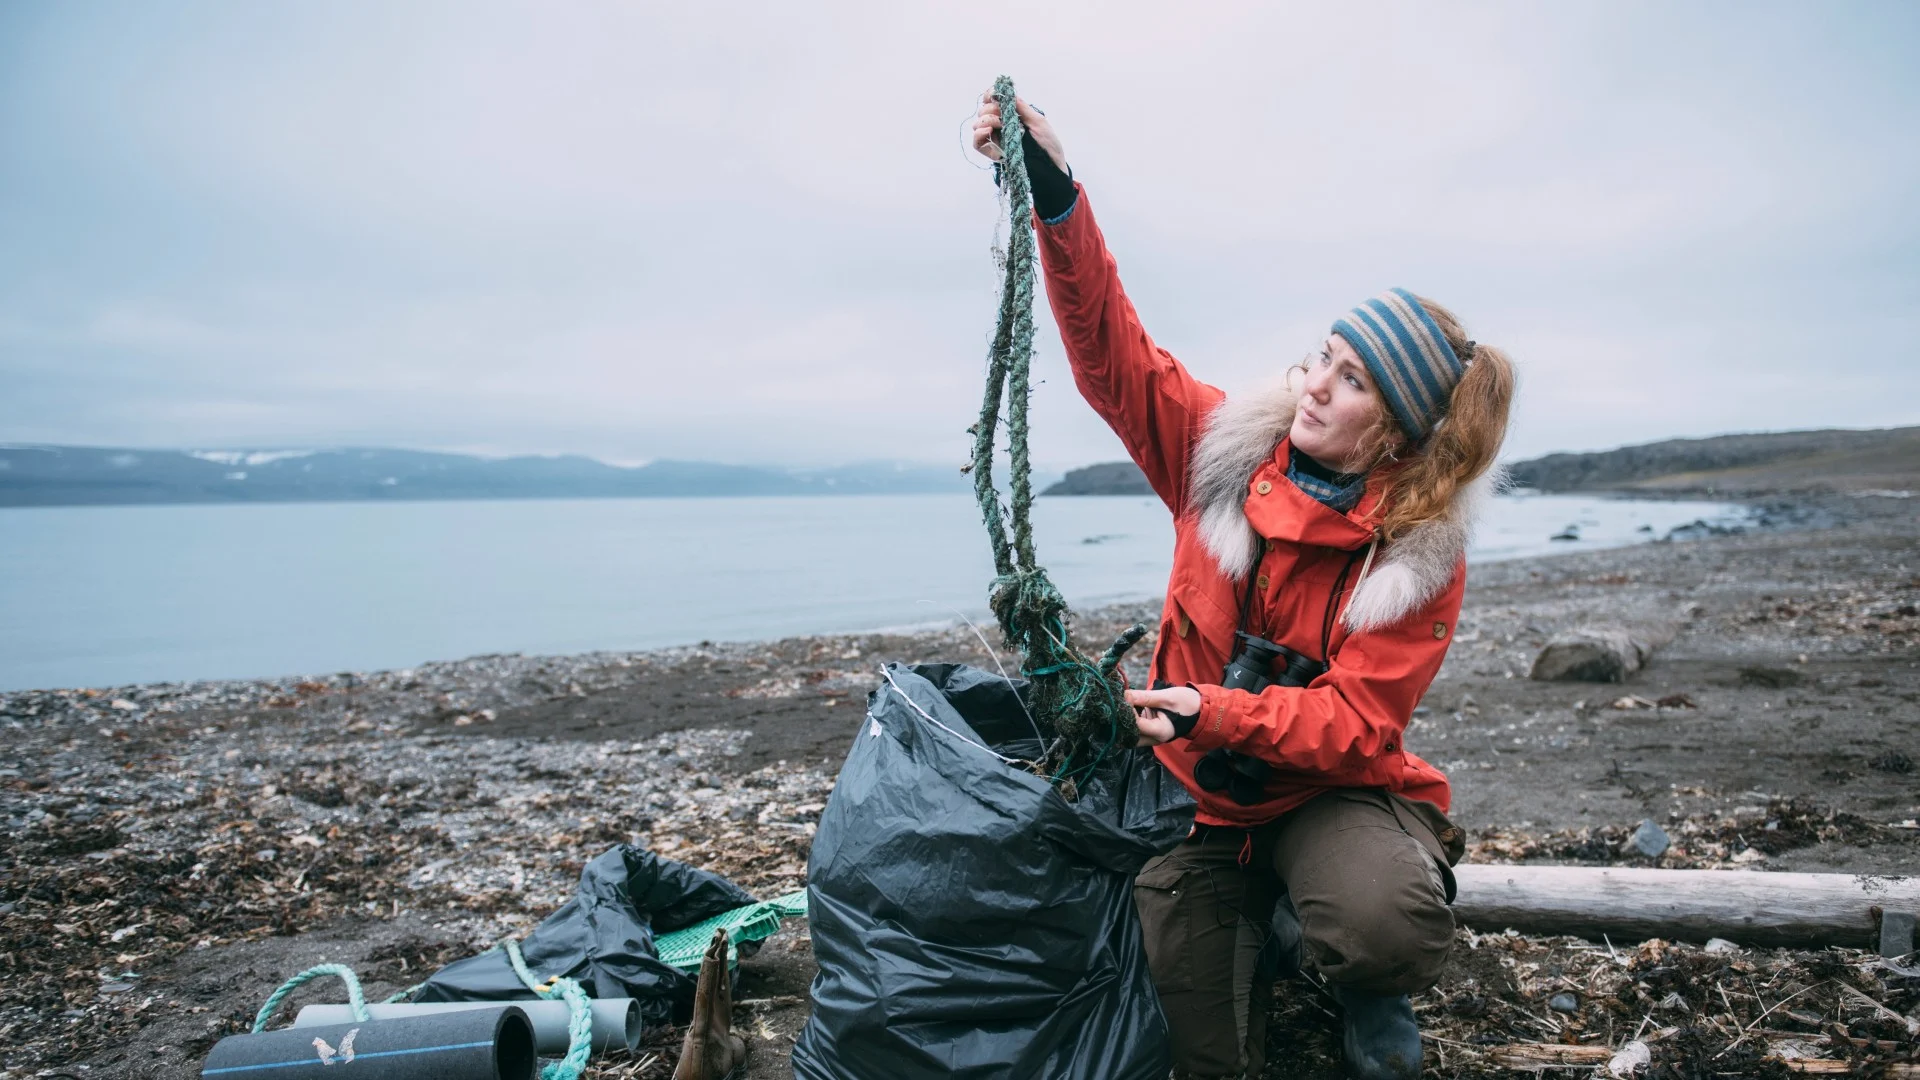 Biologist and expedition leader, Helga Bårdsdatter Kristiansen is at a beach filled with garbage, cleaning the beach